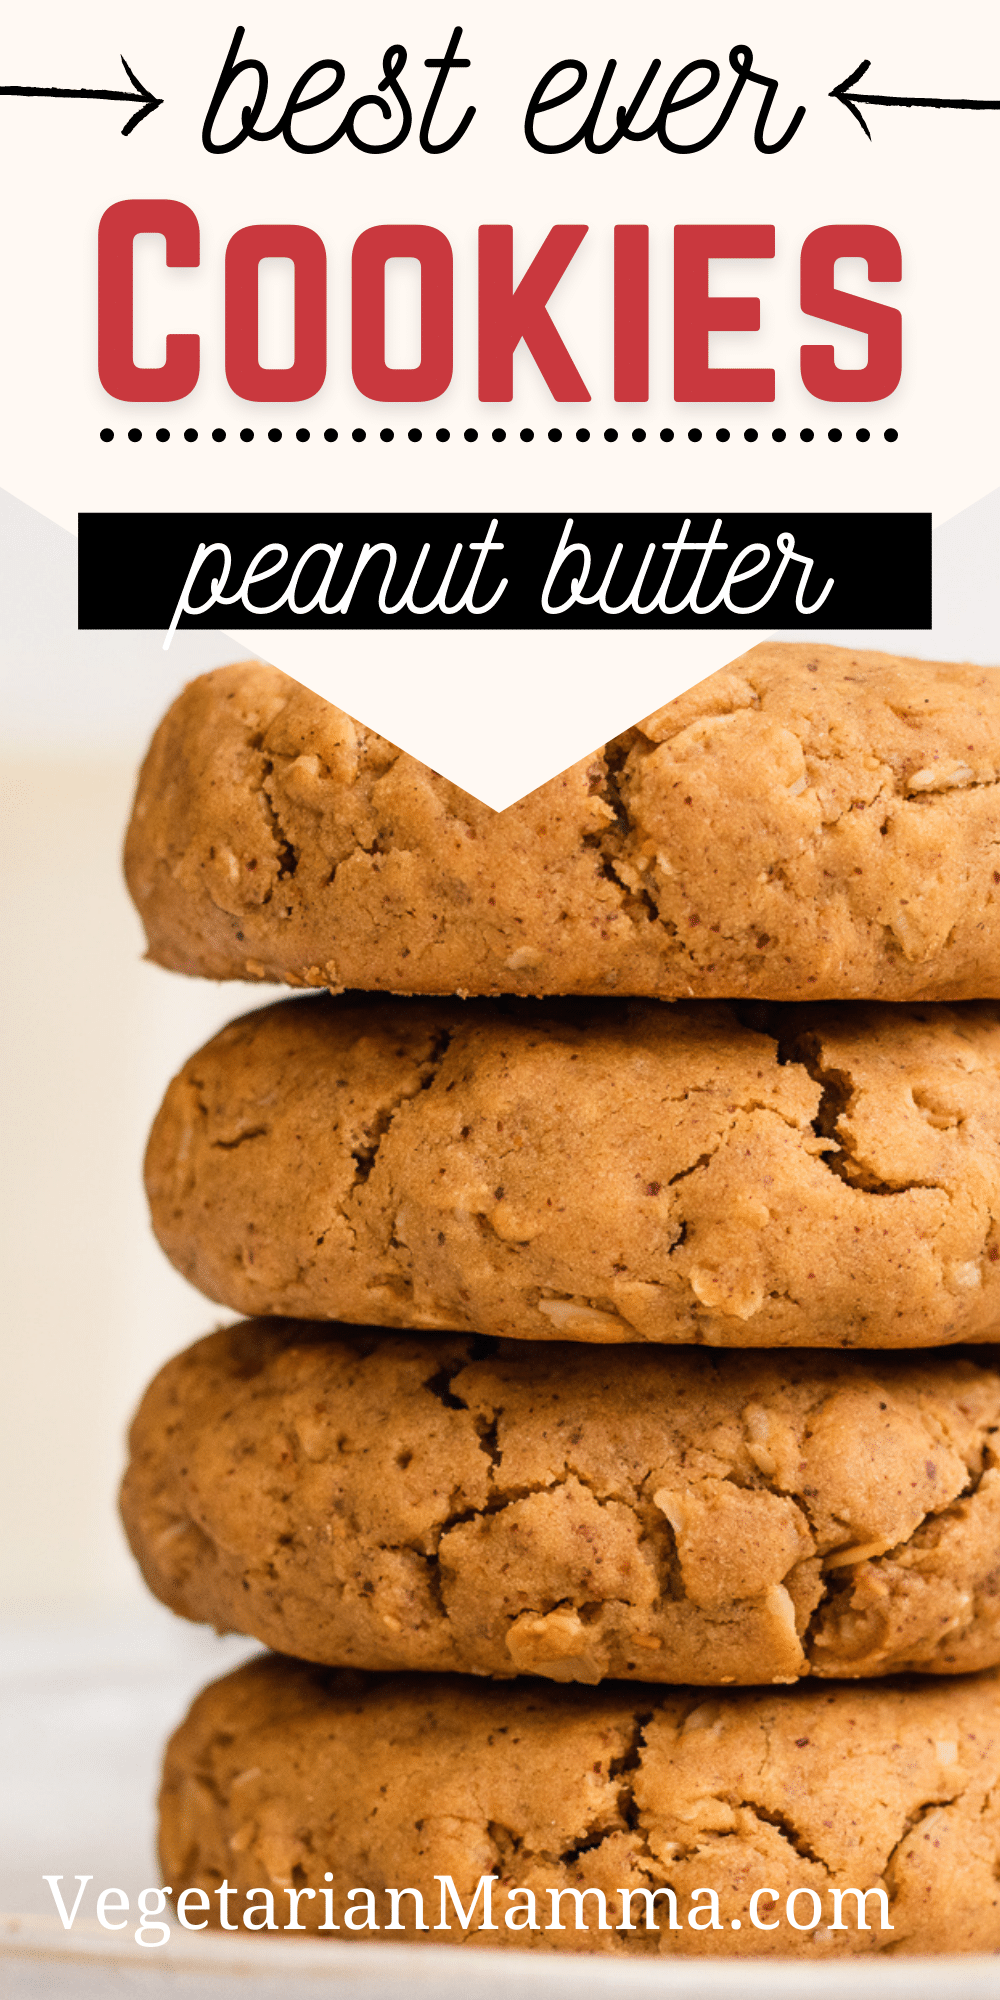 These Vegan Peanut Butter Oatmeal Cookies are so moist and gluten free, too! Made with rolled oats, natural peanut butter, and gluten-free flour, these are the easiest cookies to make without a mixer.